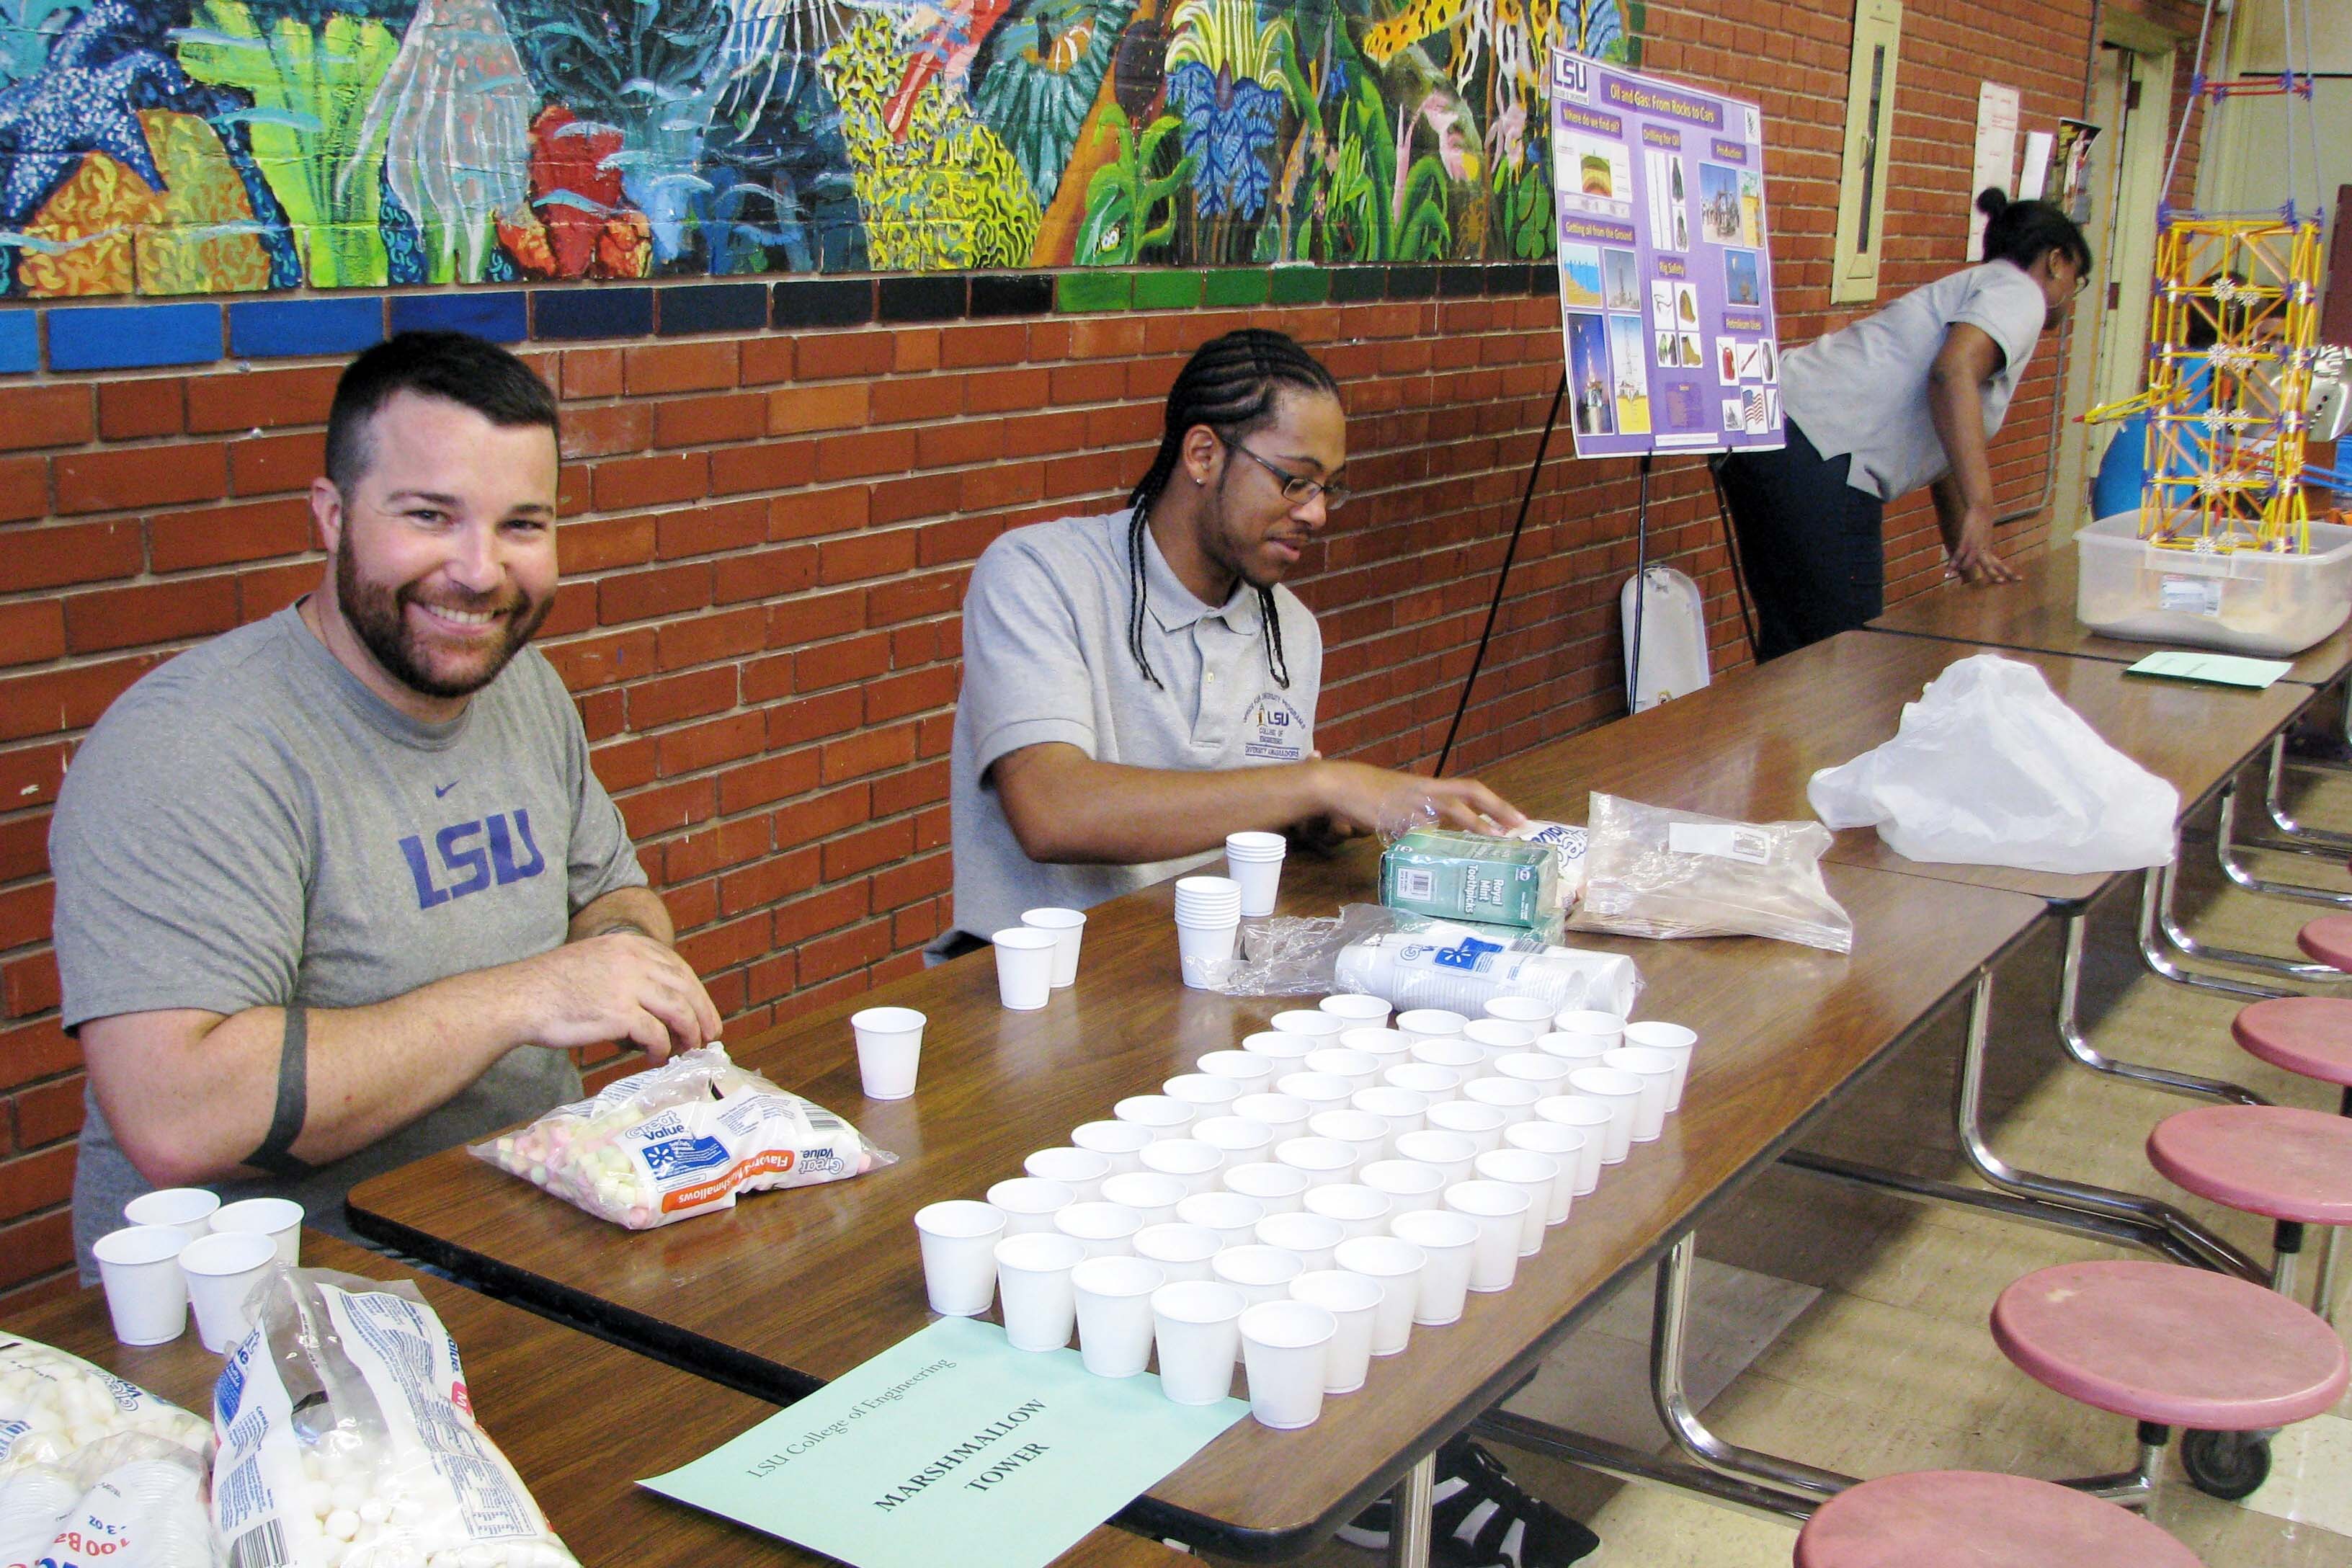 Two people sitting at cafeteria table with cups